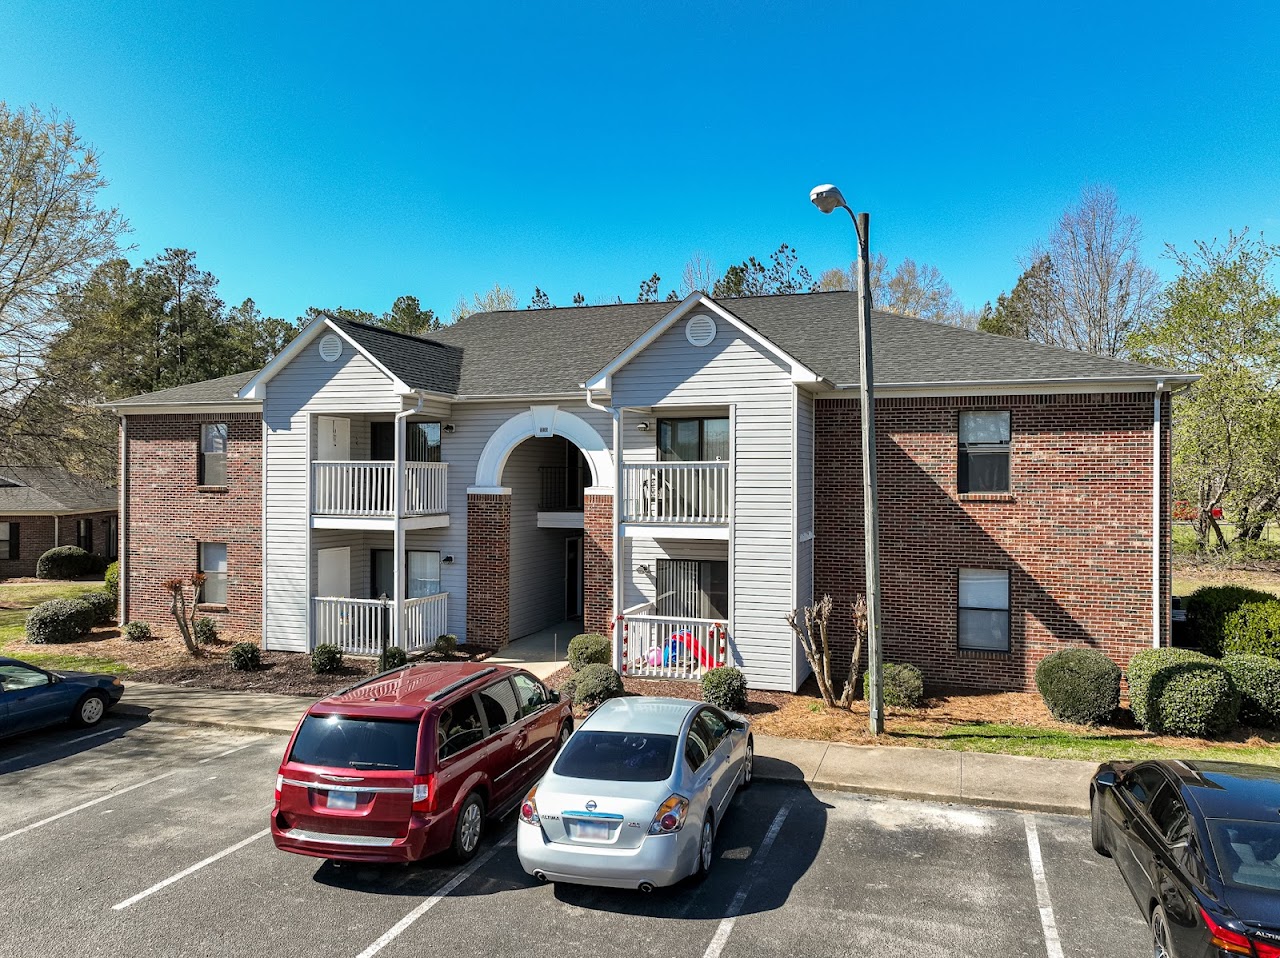 Photo of MCKENZIE PARK APTS PHASE II. Affordable housing located at HARKEY ROAD SANFORD, NC 27330